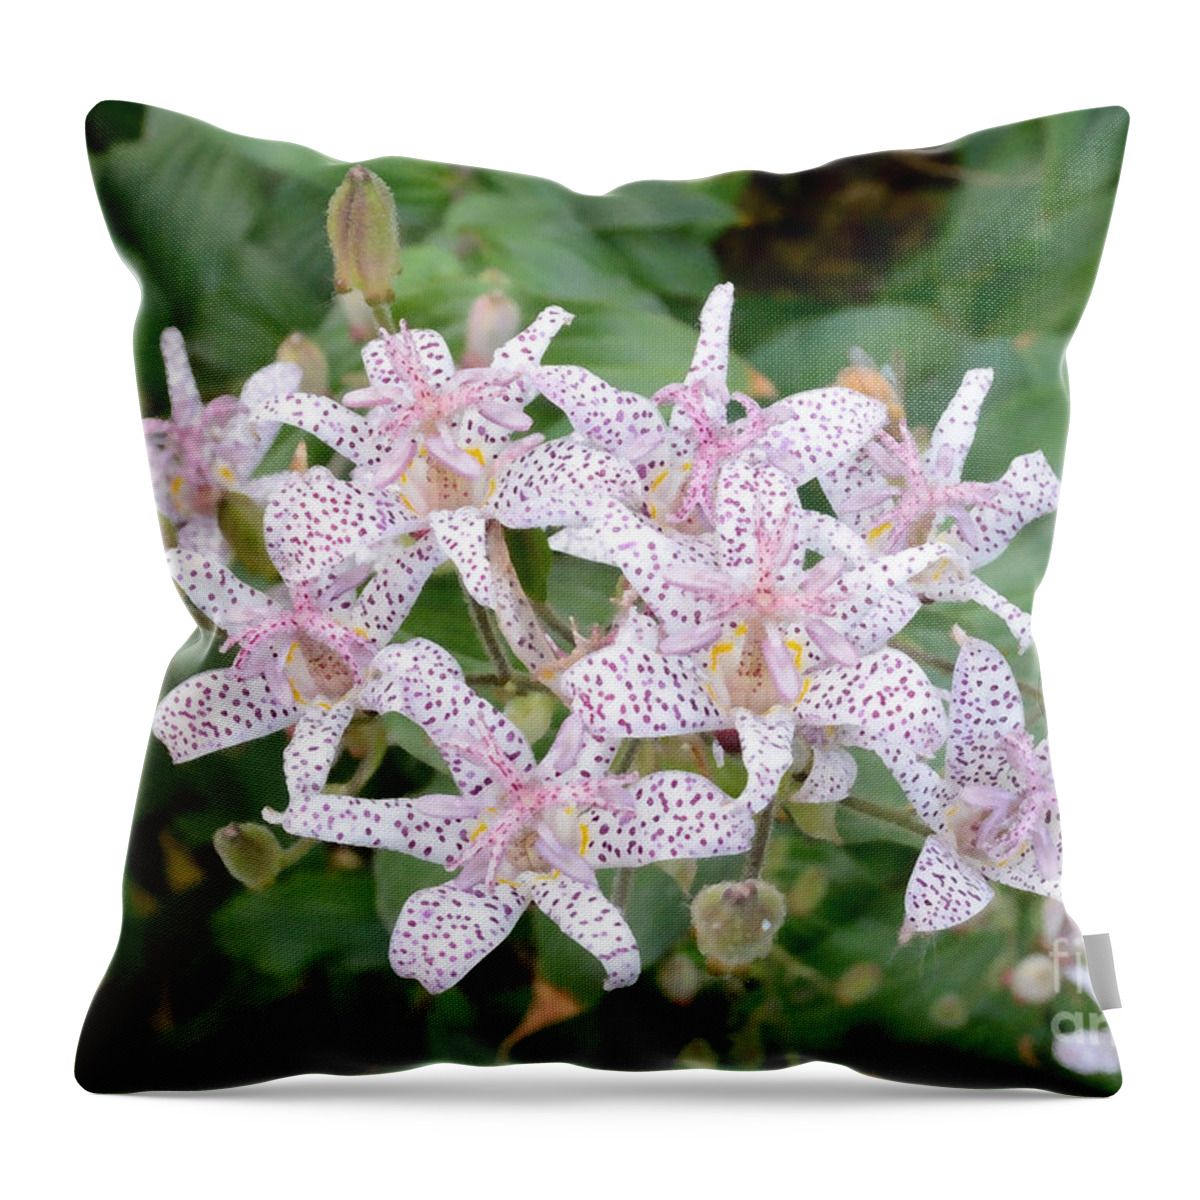 Fall Throw Pillow featuring the photograph Toad Lily Blossoms Tom Wurl by Tom Wurl